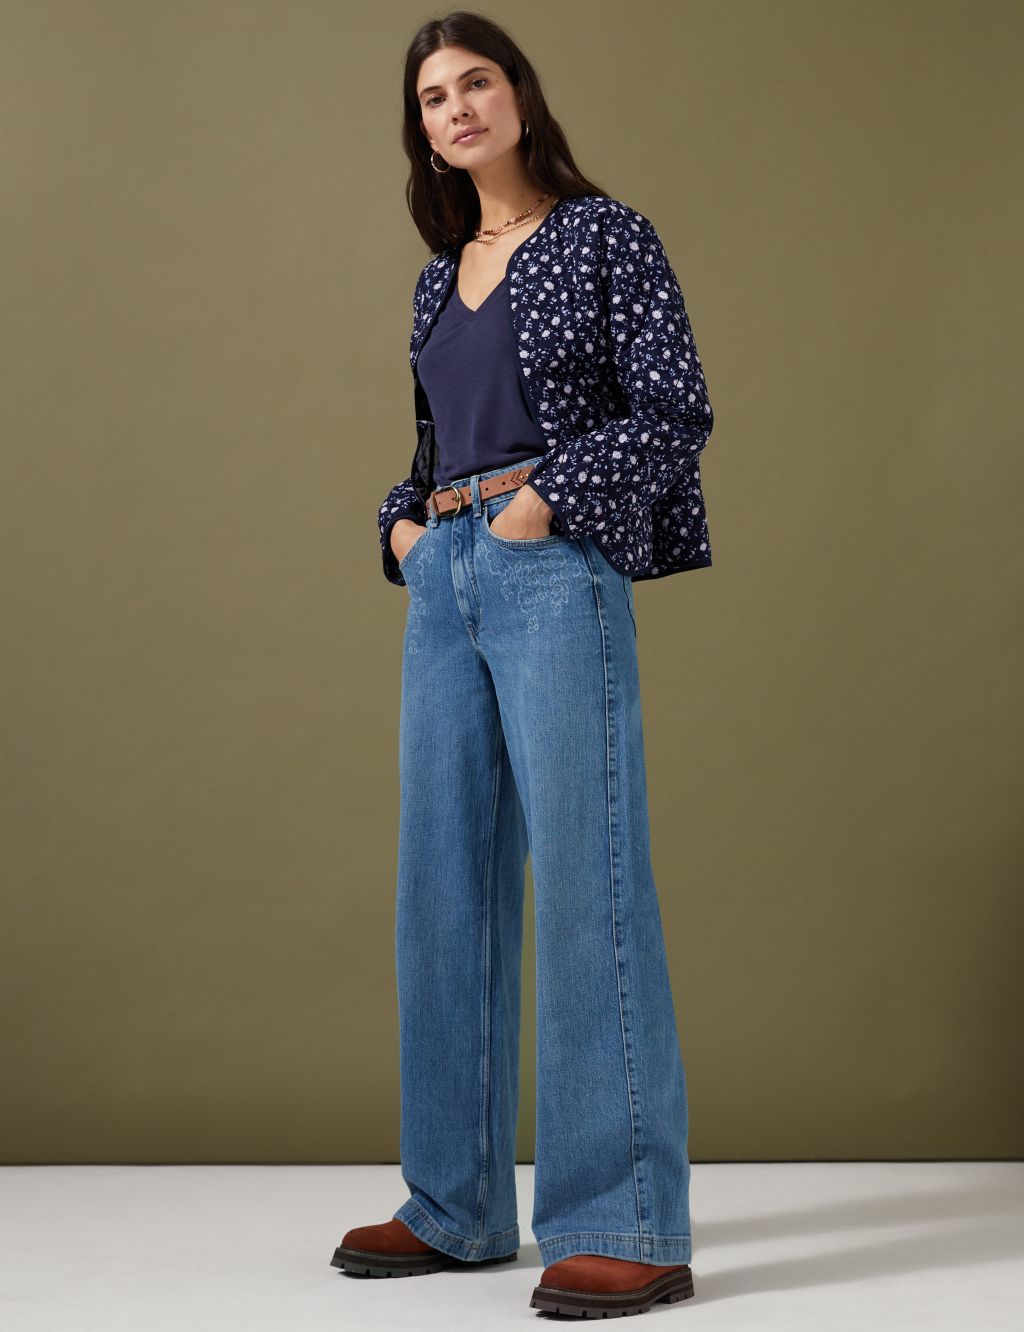 High Waisted Floral Wide Leg Jeans image 1